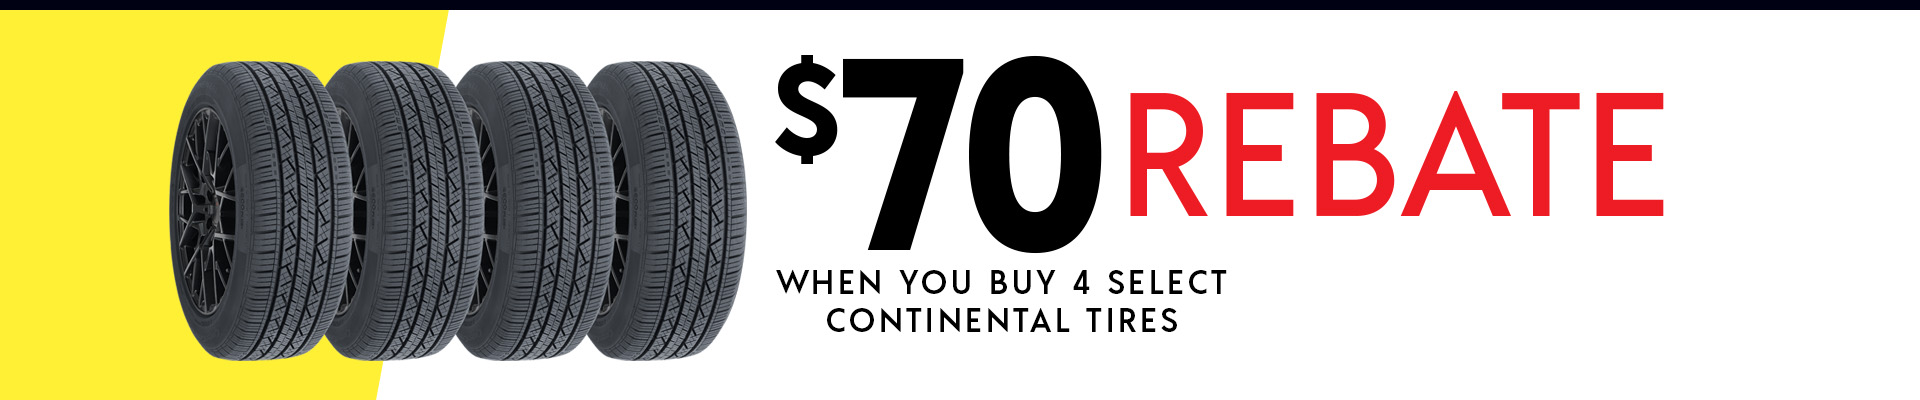 Manufacturer Rebates of $70 on Select Continental Tires